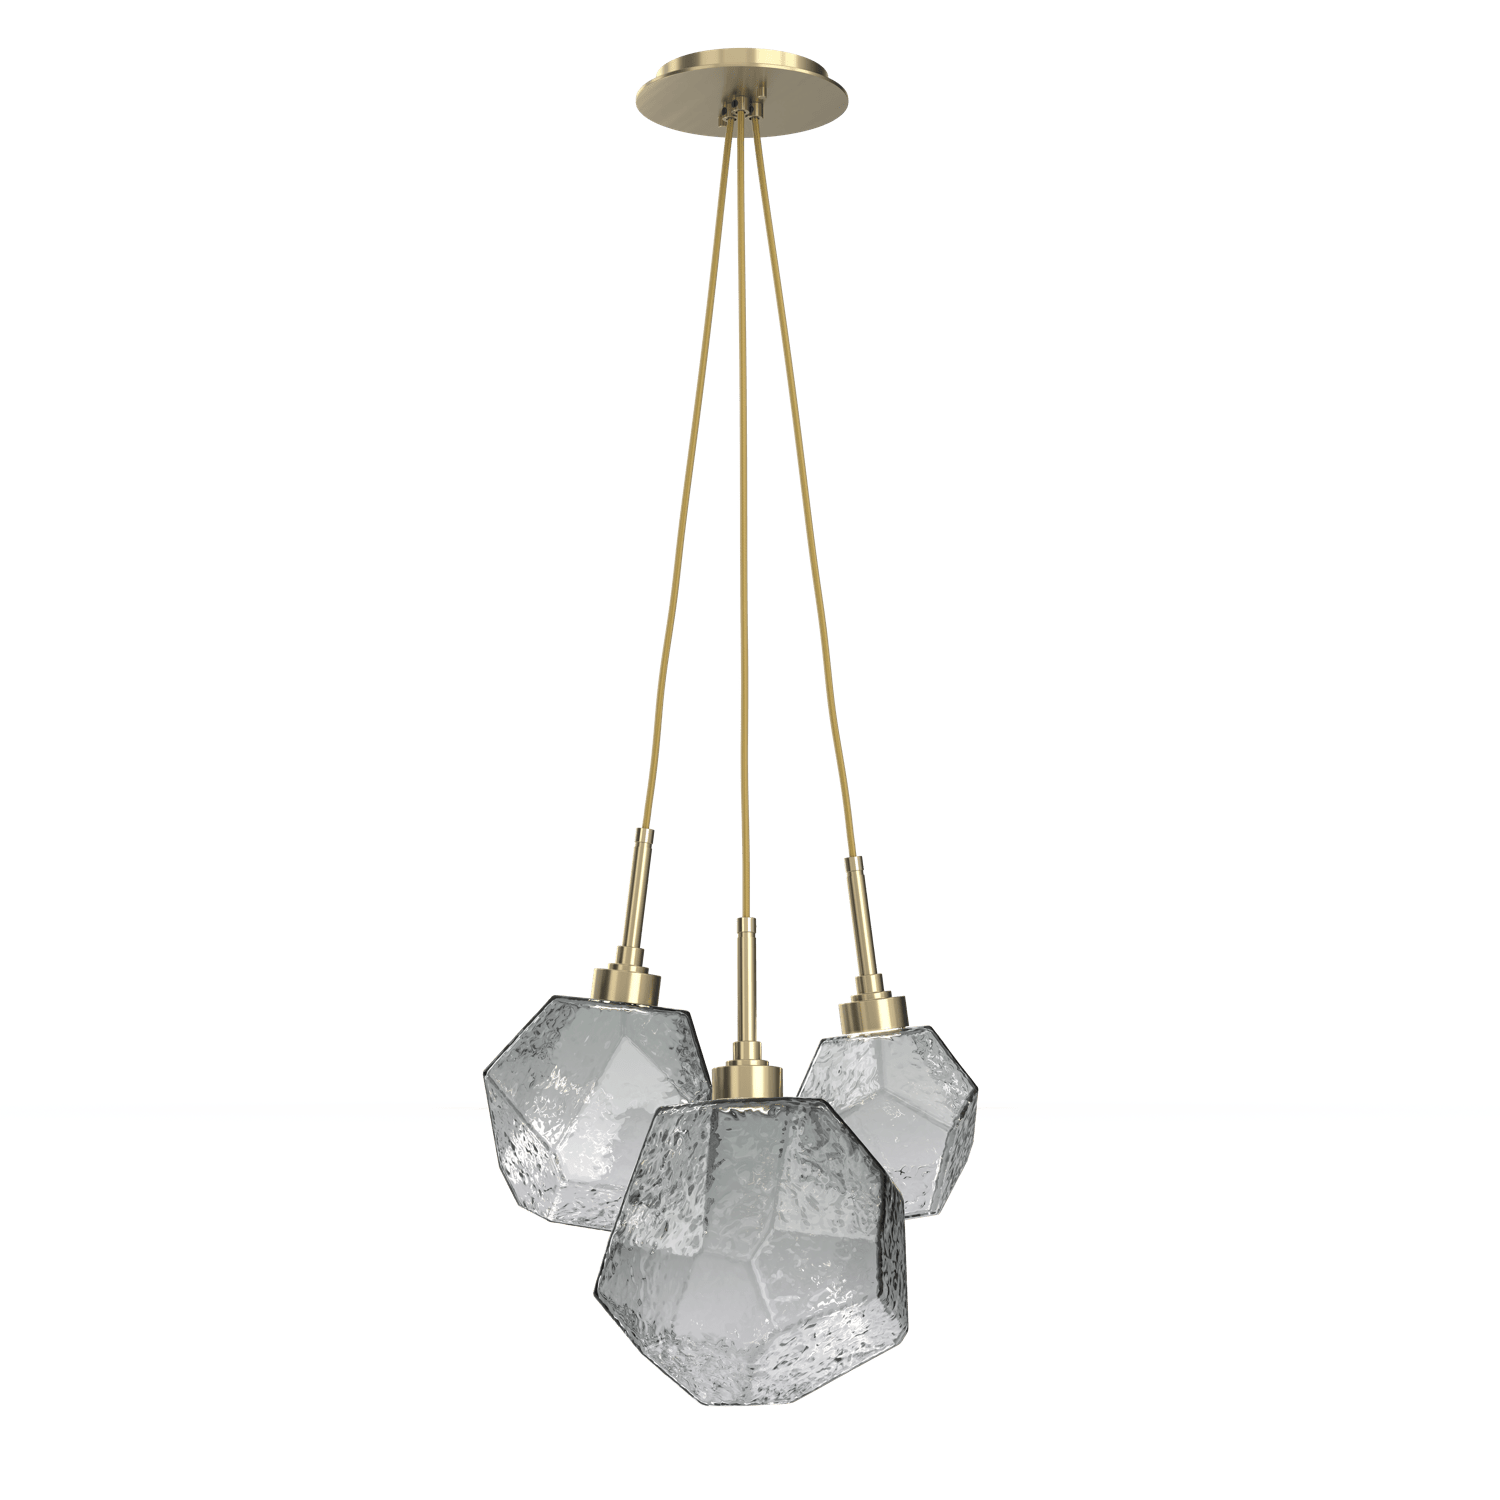 CHB0039-0E-HB-S-Hammerton-Studio-Gem-3-light-cluster-pendant-light-with-heritage-brass-finish-and-smoke-blown-glass-shades-and-LED-lamping